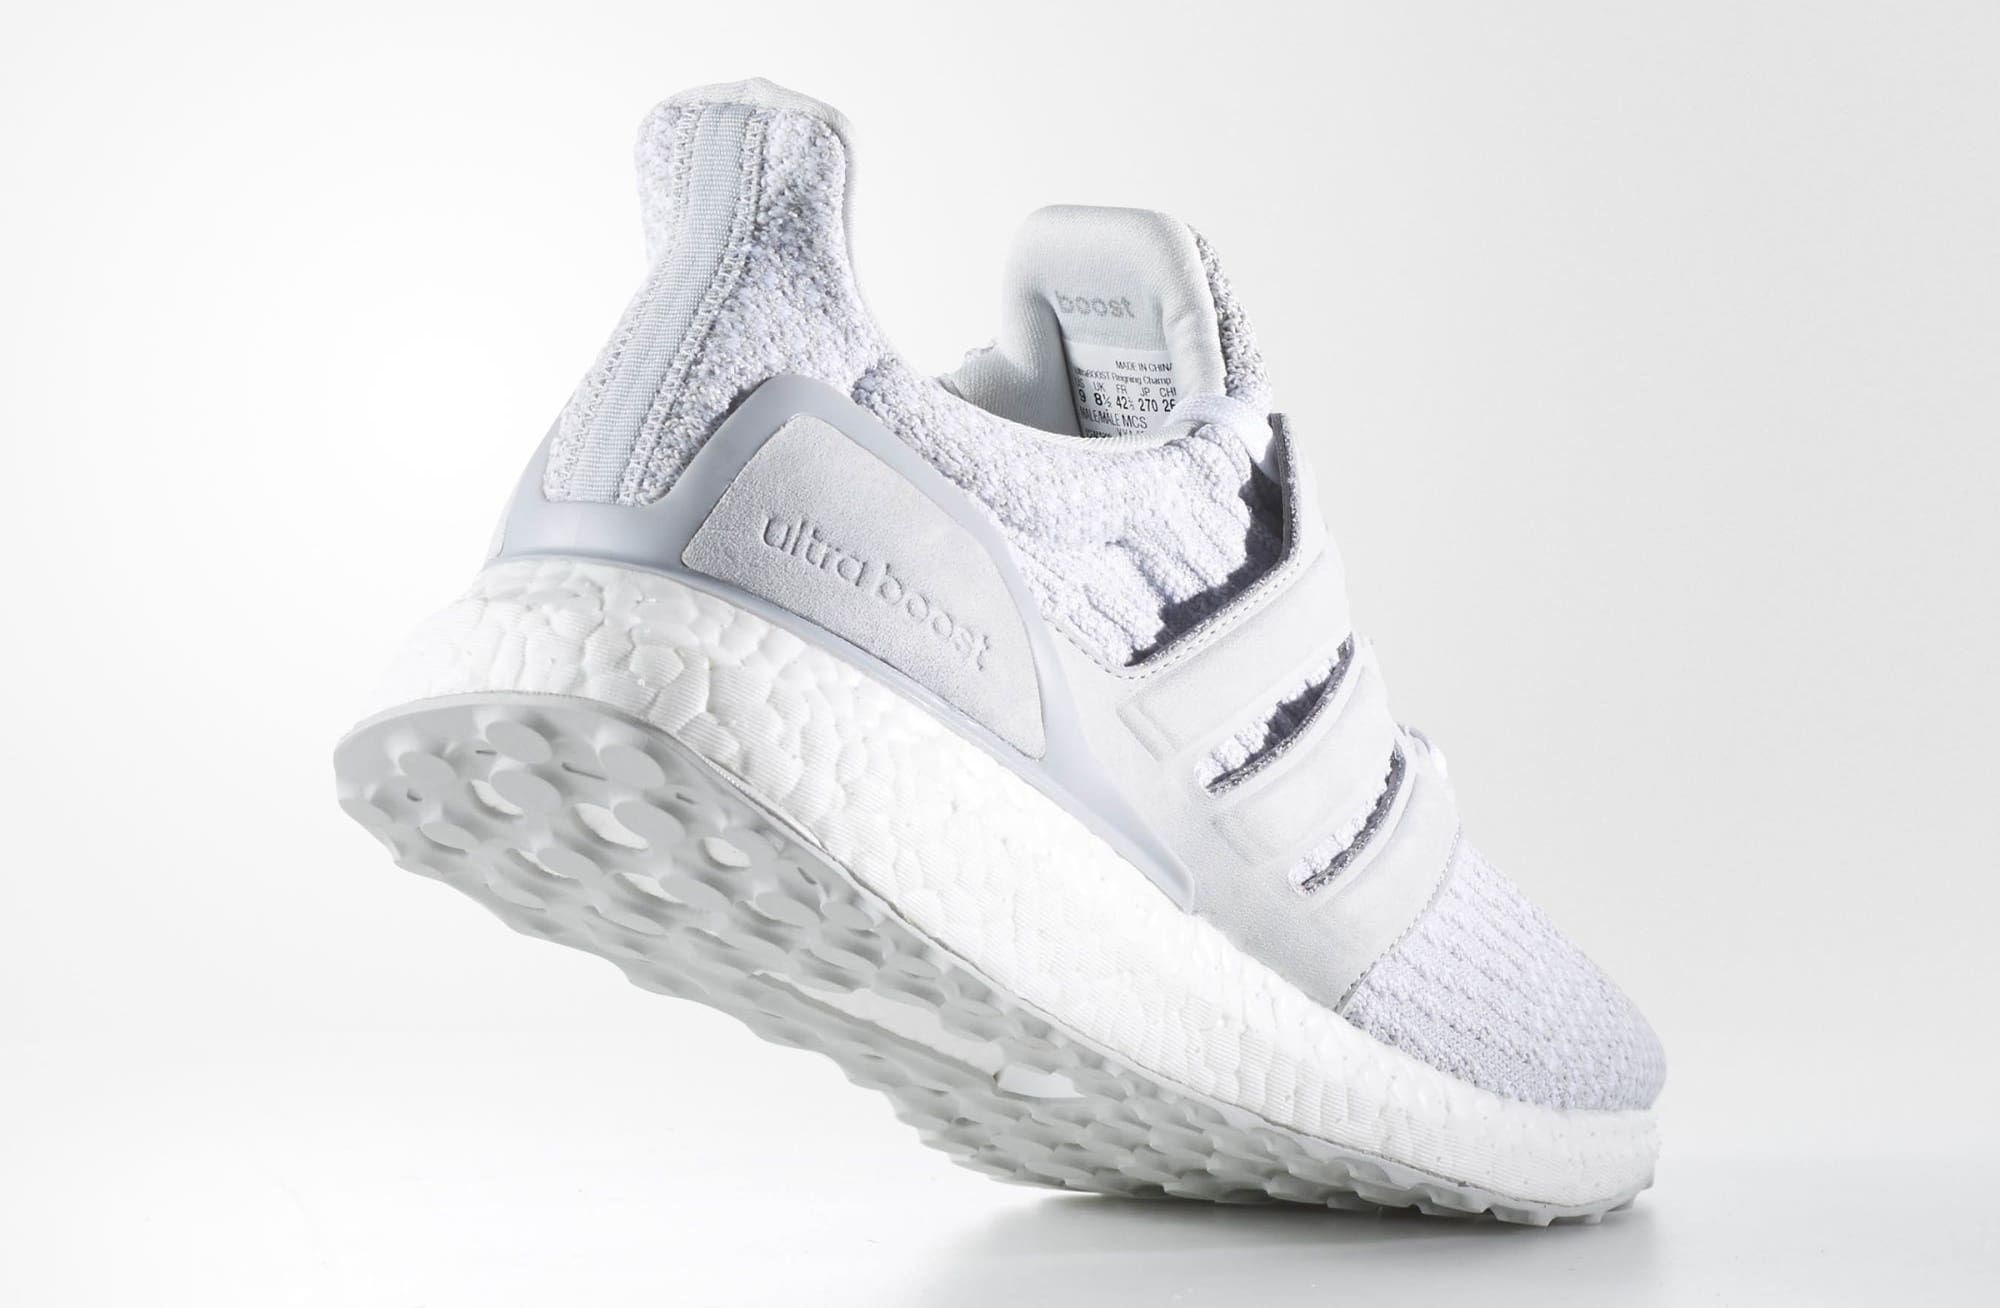 Reigning Champ is Releasing Another adidas Ultra Boost | Nice Kicks